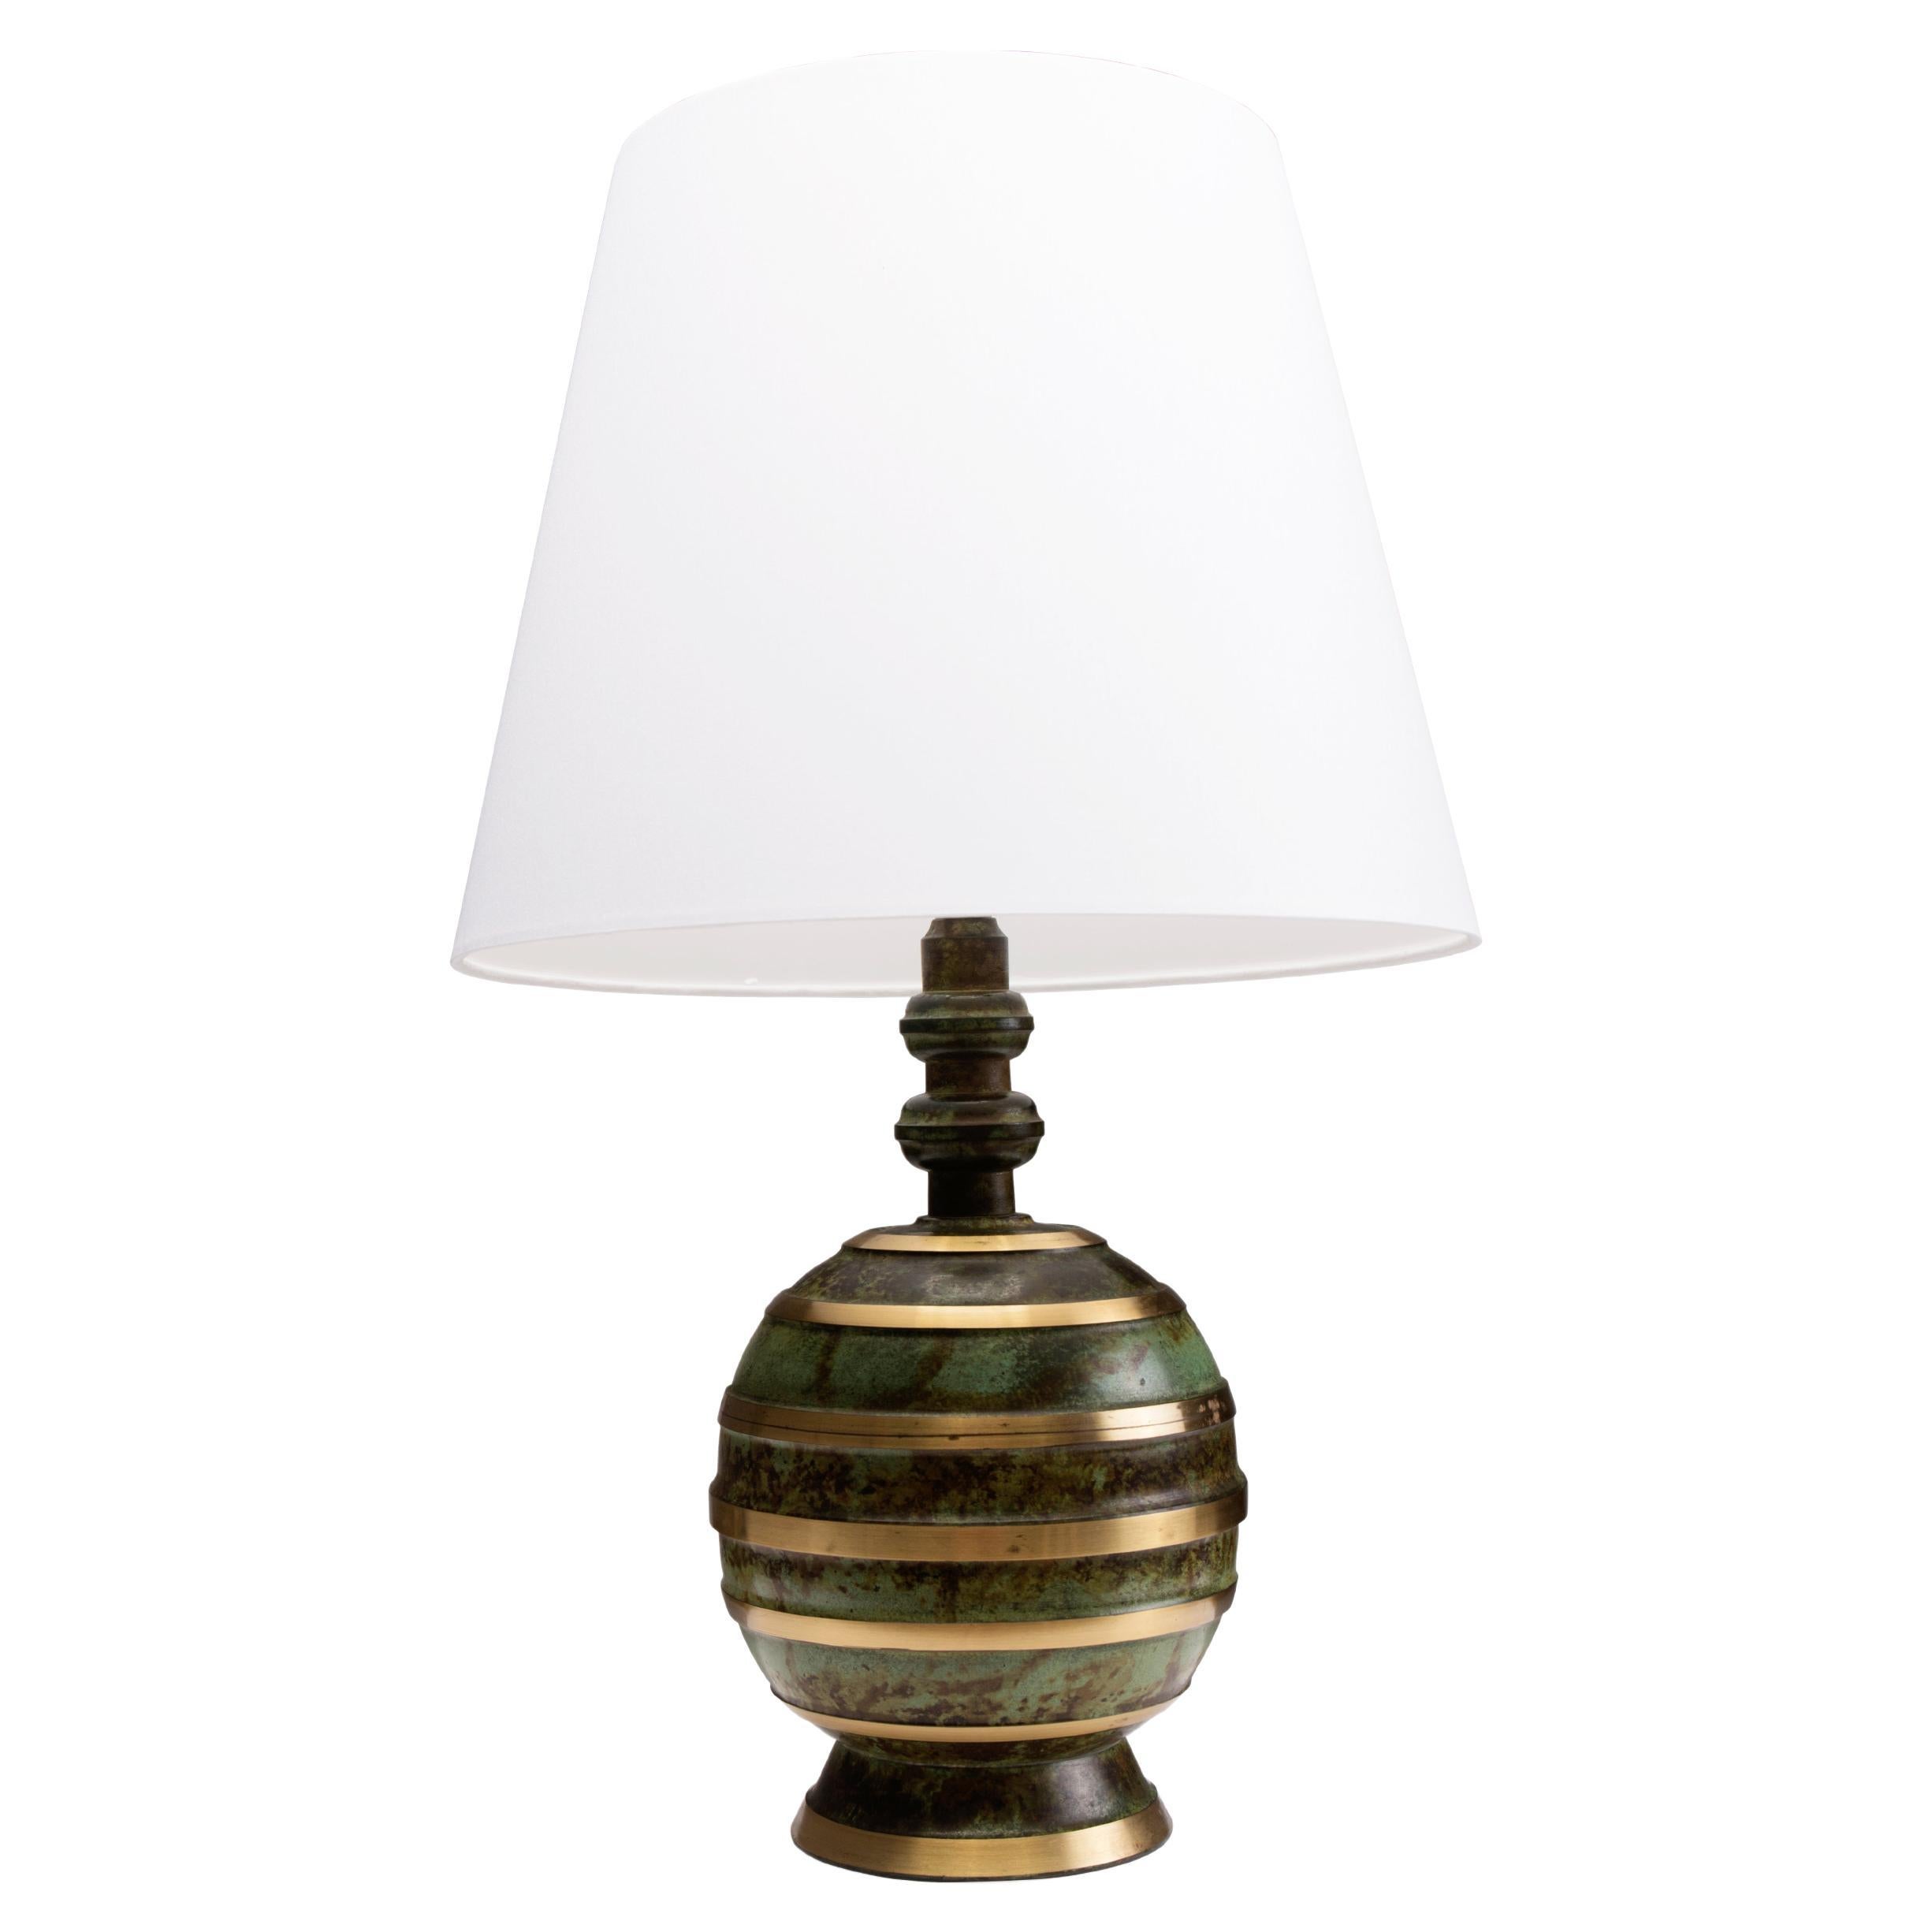 Swedish art deco table lamp with patinated and polished bronze For Sale